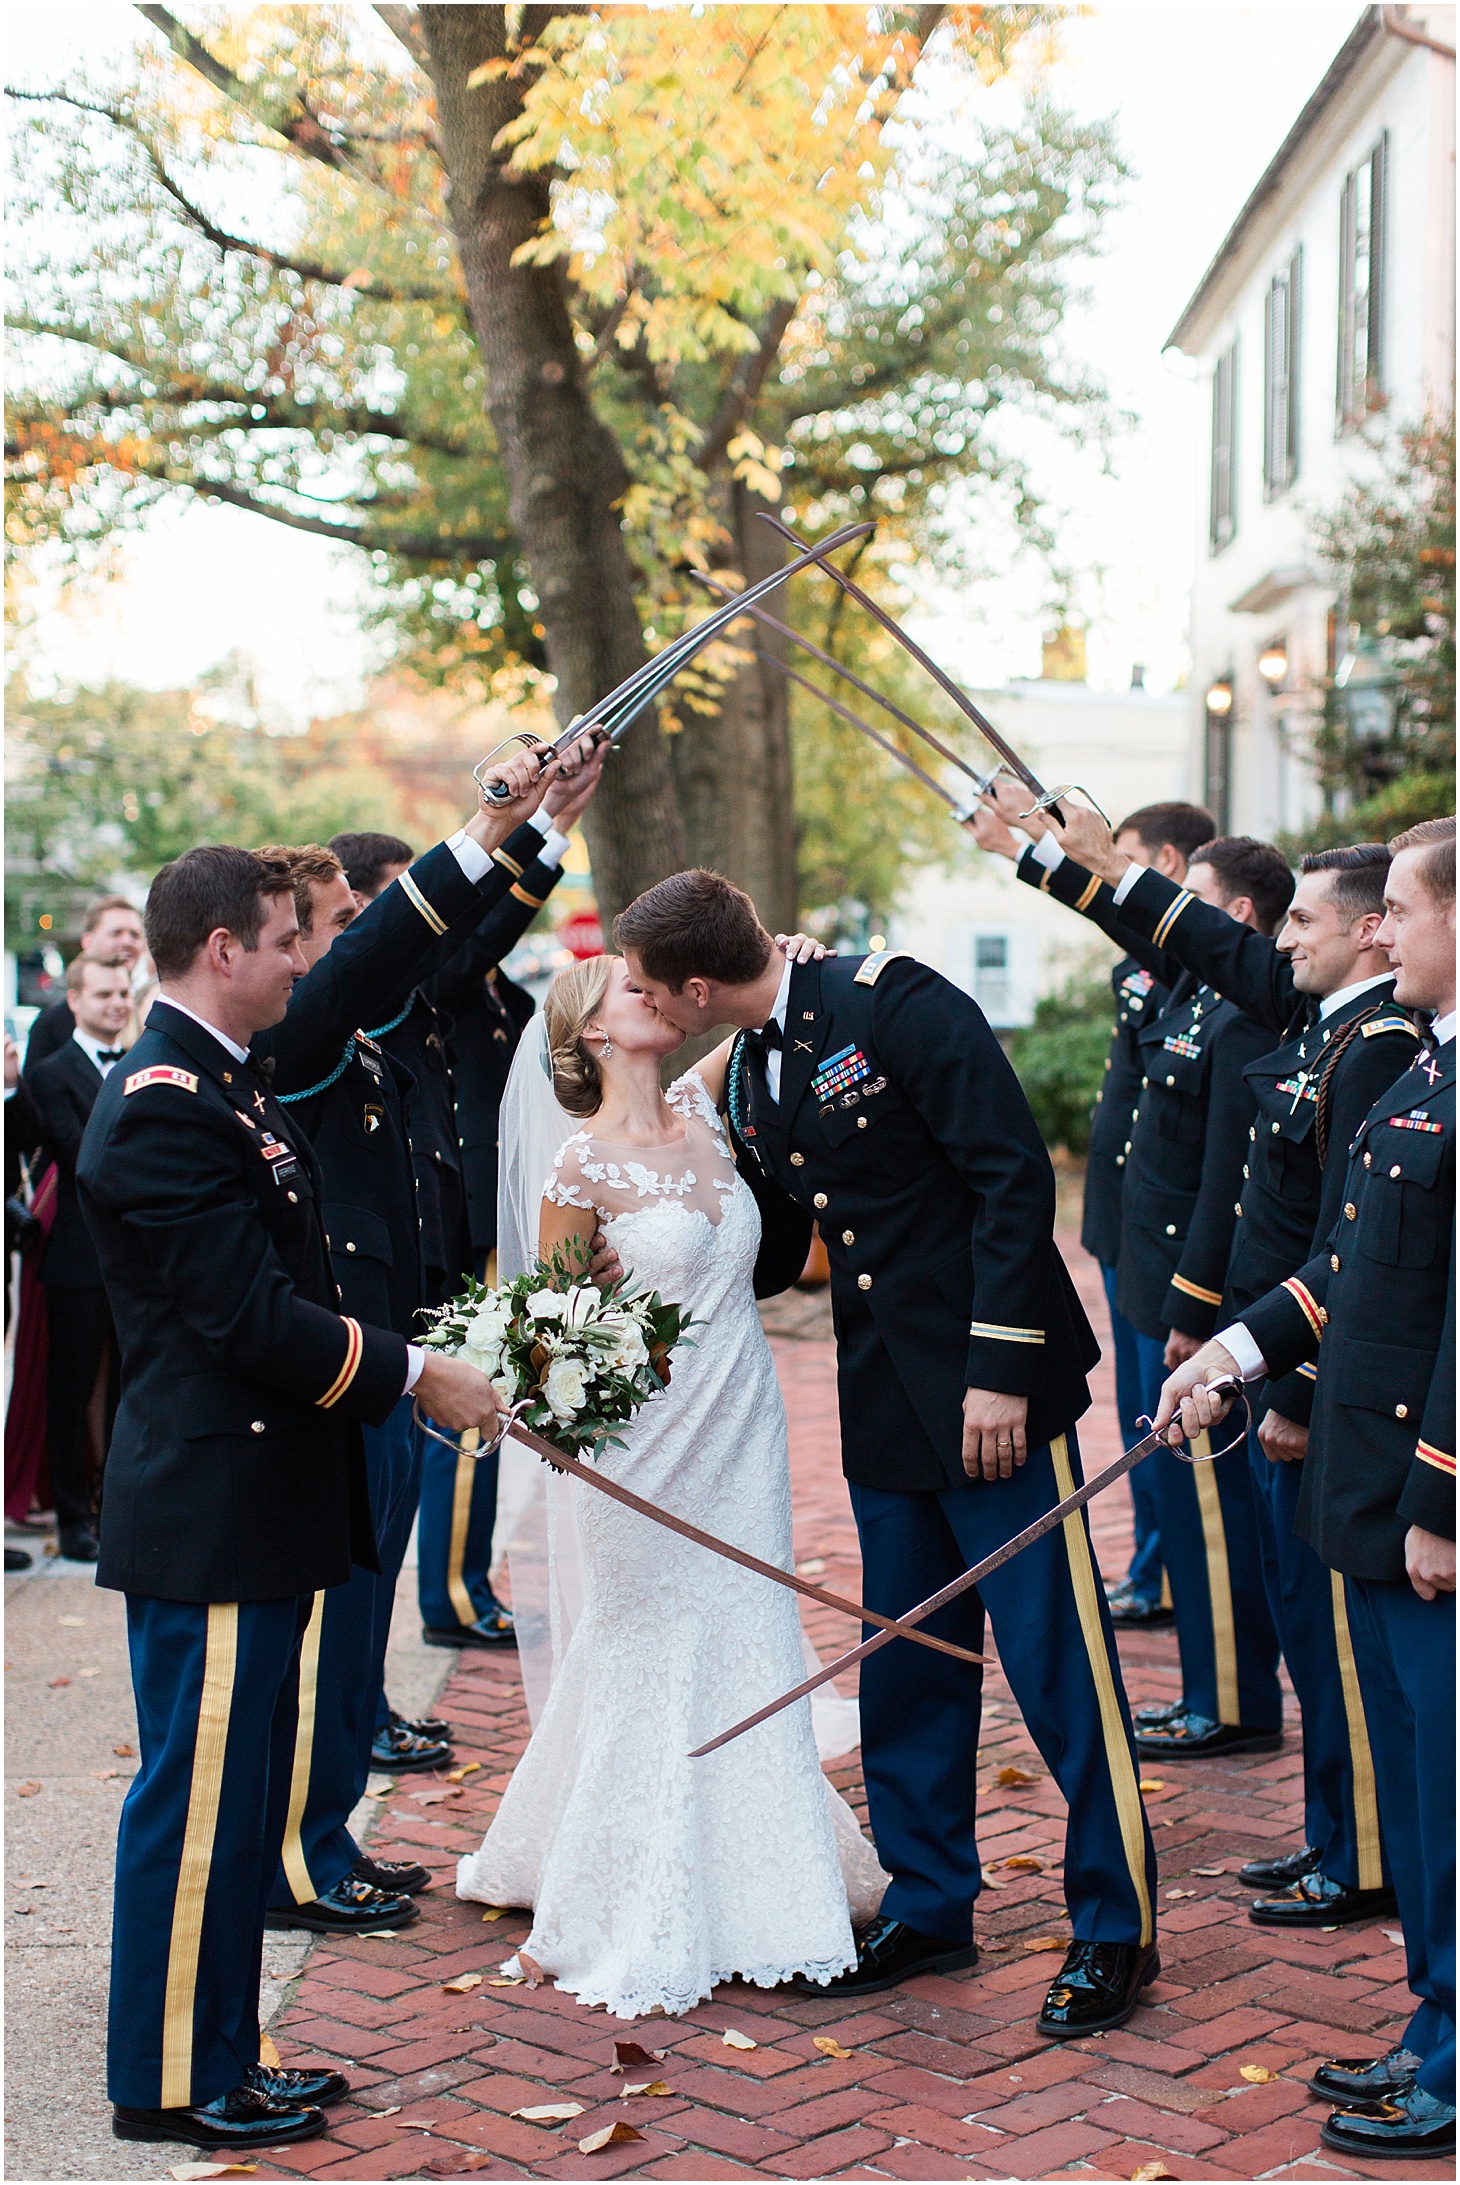 Army Saber Arch Salute | Old Presbyterian Meeting House Ceremony | Southern Black Tie wedding at St. Regis DC in Dusty Blue and Ivory | Sarah Bradshaw Photography